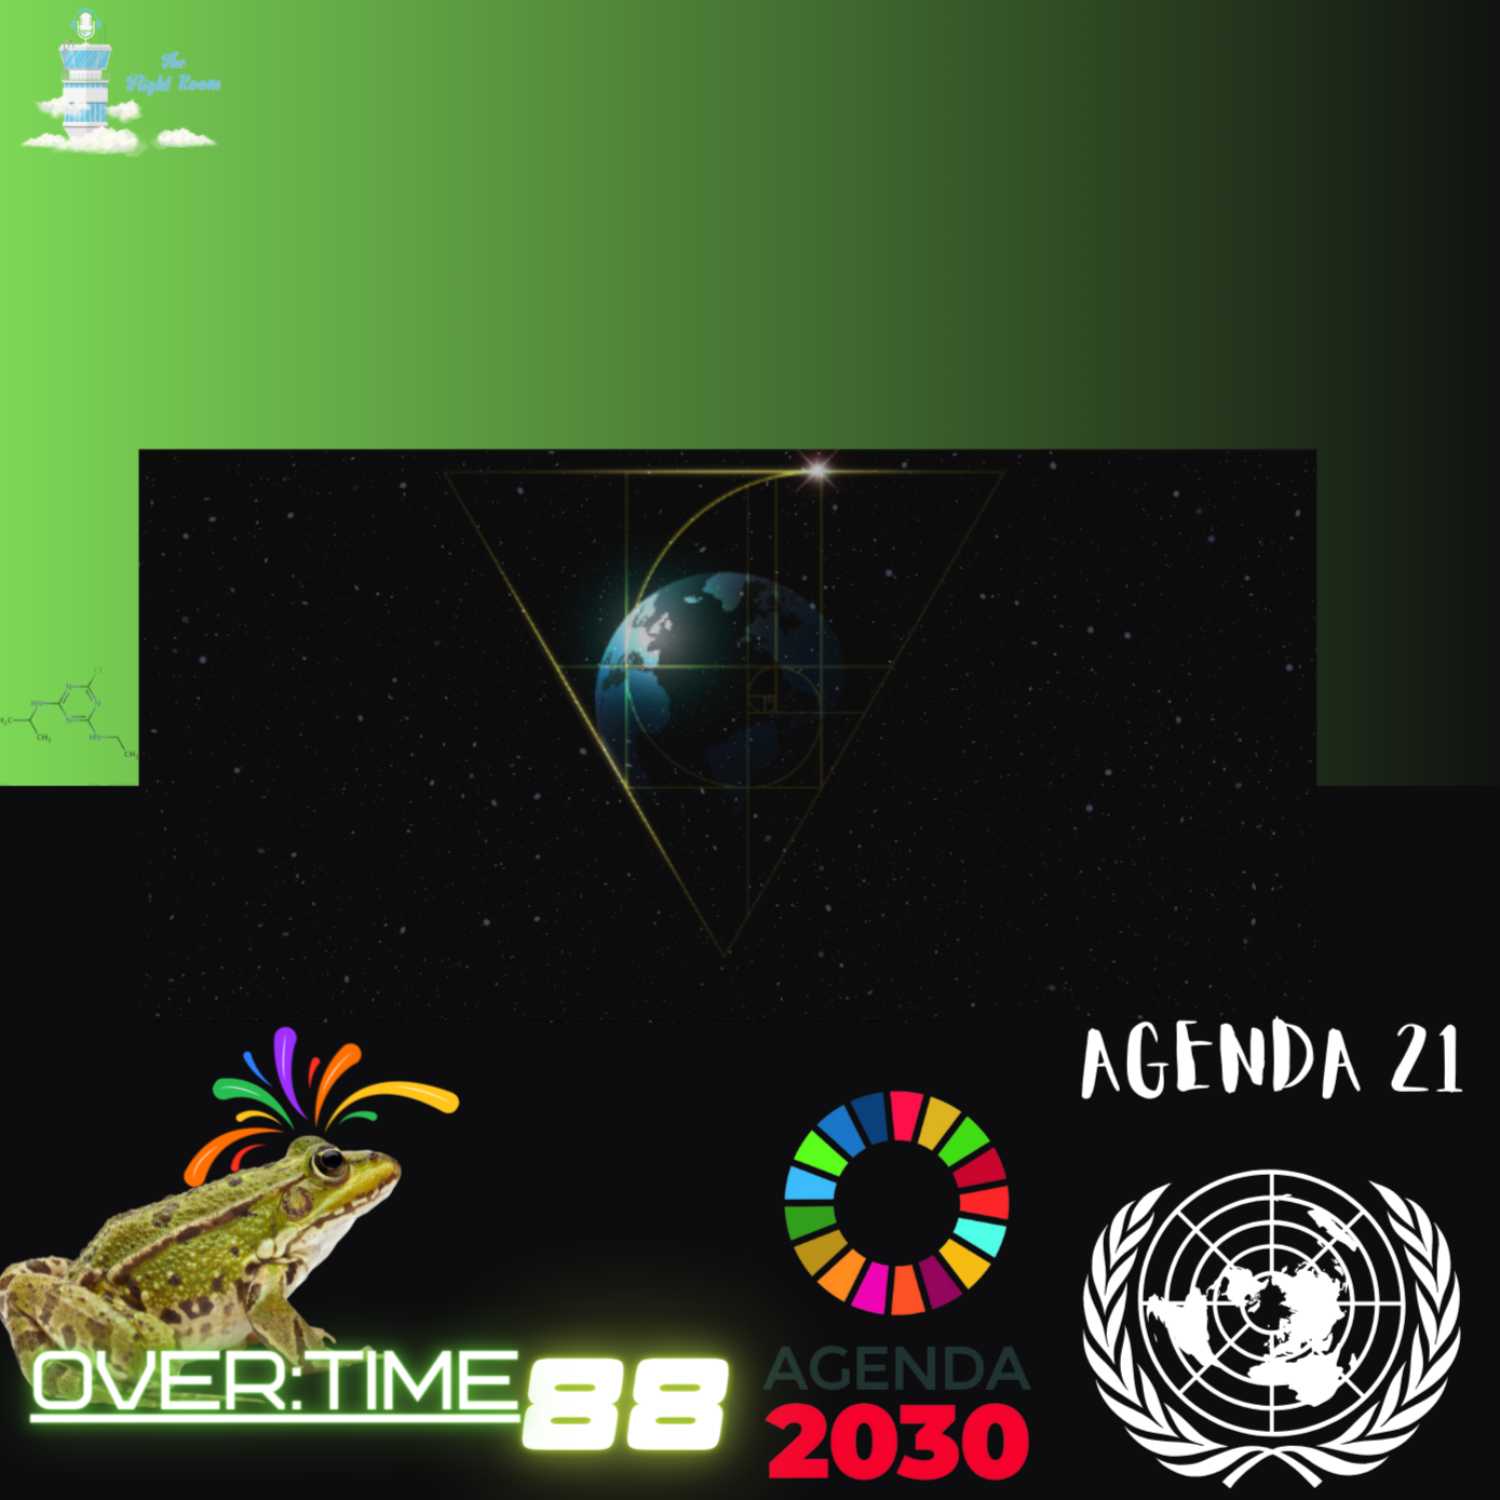 OVER:TIME WITH THE FLIGHT ROOM #88( 2021/2030 AGENDA, WILDLANDS PROJECT , GAYFROGS)